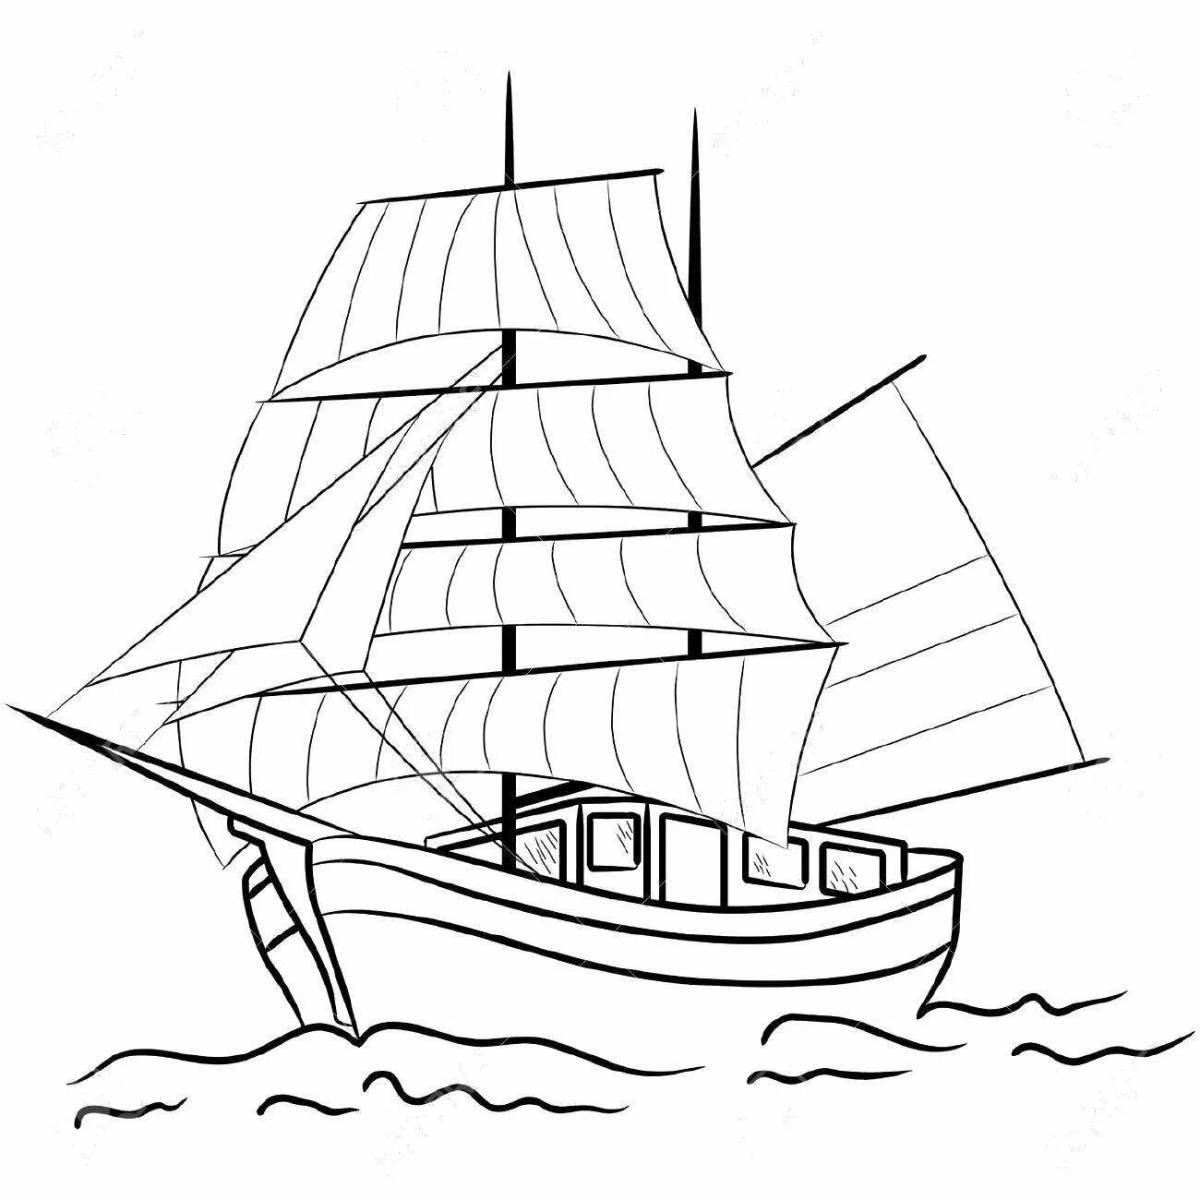 Ship with sails #5